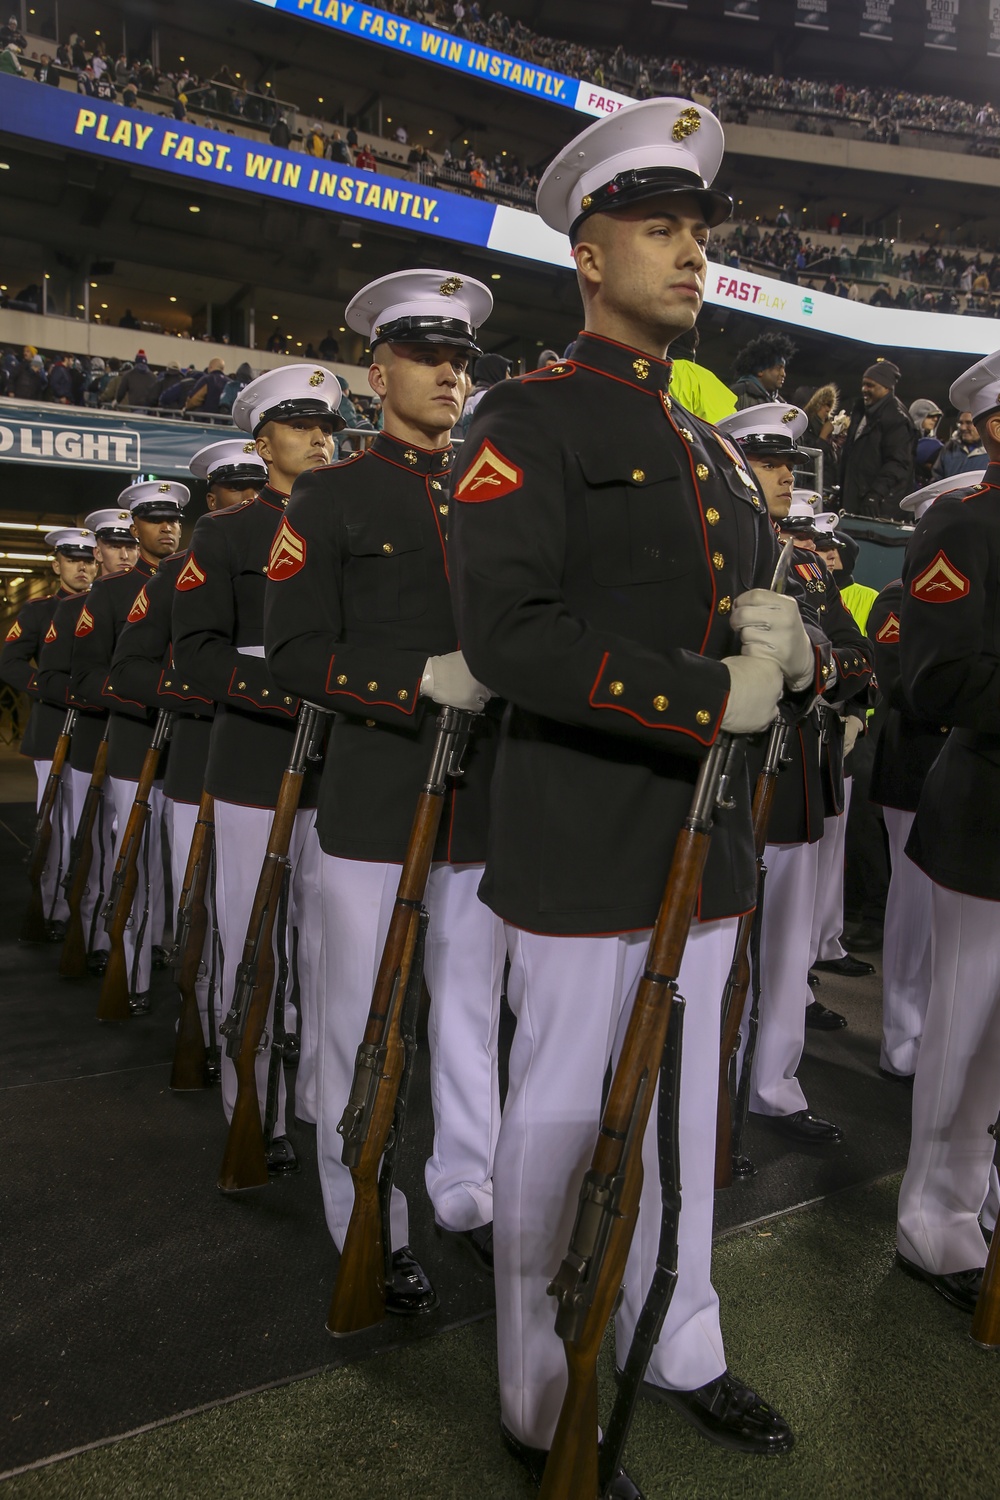 Silent Drill Platoon Performs During Philadelphia Eagles Half Time Show